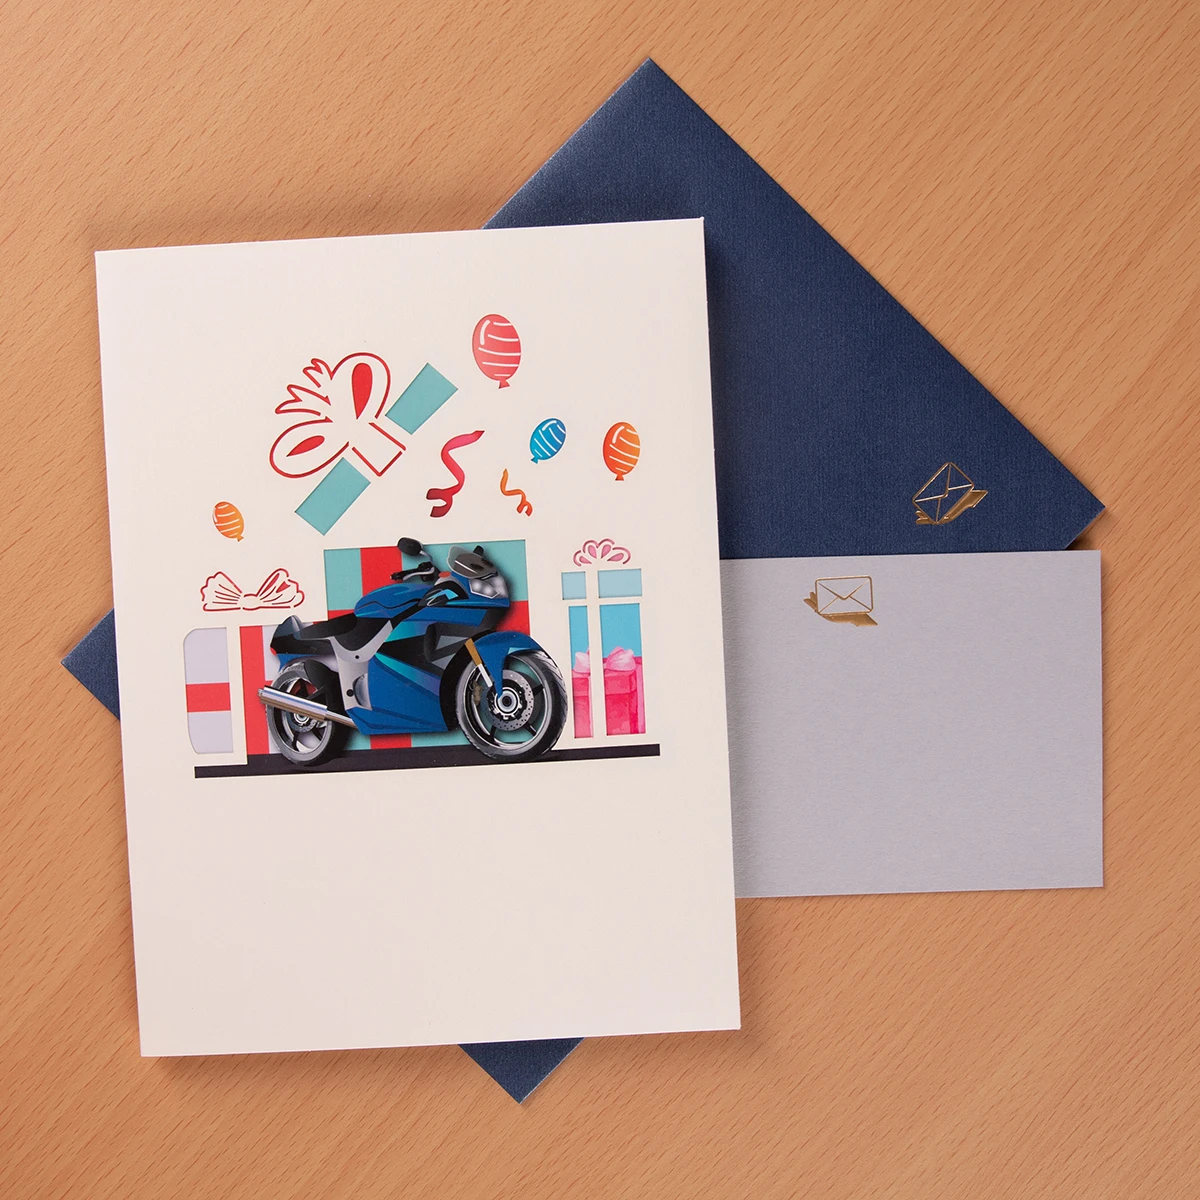 3D Motorcycle Pop Up Card Birthday Fathers Day Gift for Dad Kids Husband Handmade Greeting Cards